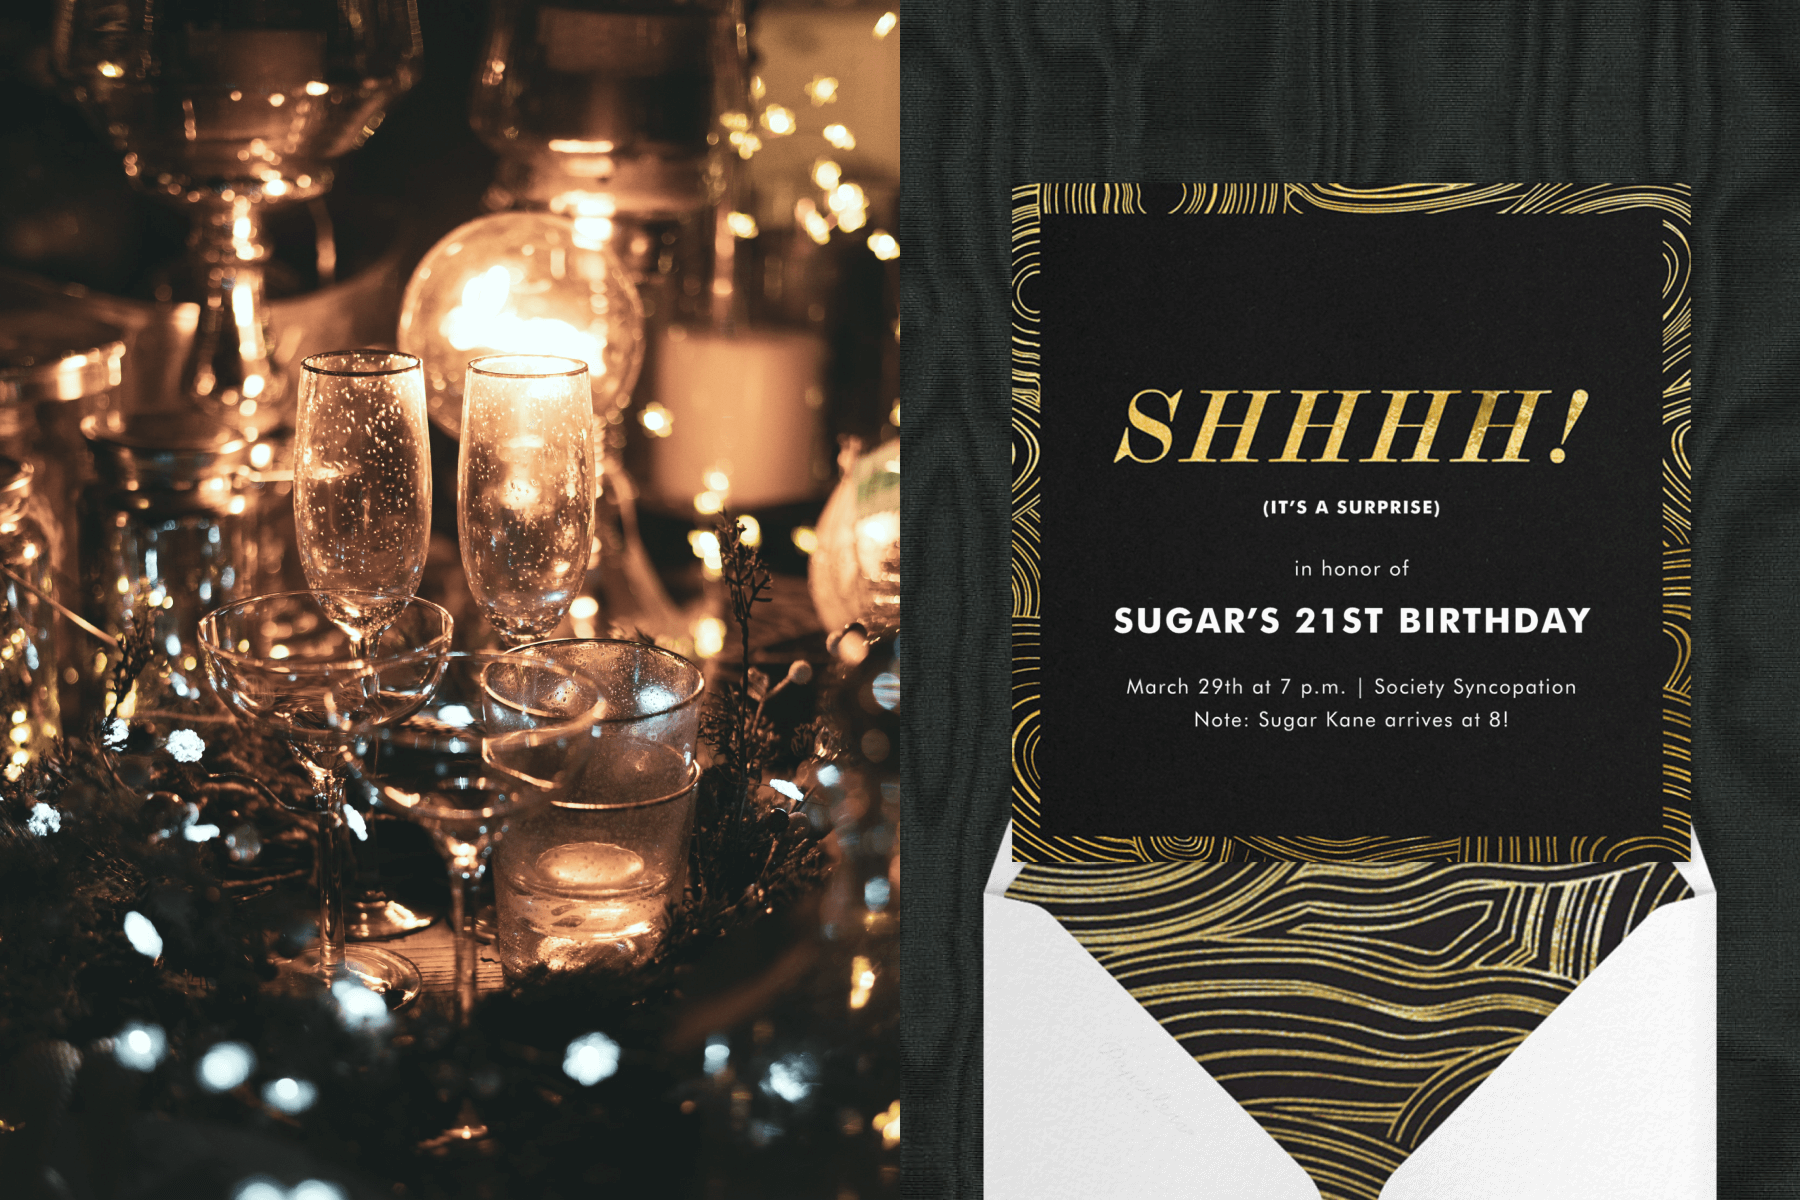 Left: A dark close-up of empty cocktail glasses on a tray surrounded by fairy lights; Right: A 21st birthday invitation featuring a black-and-gold malachite pattern.